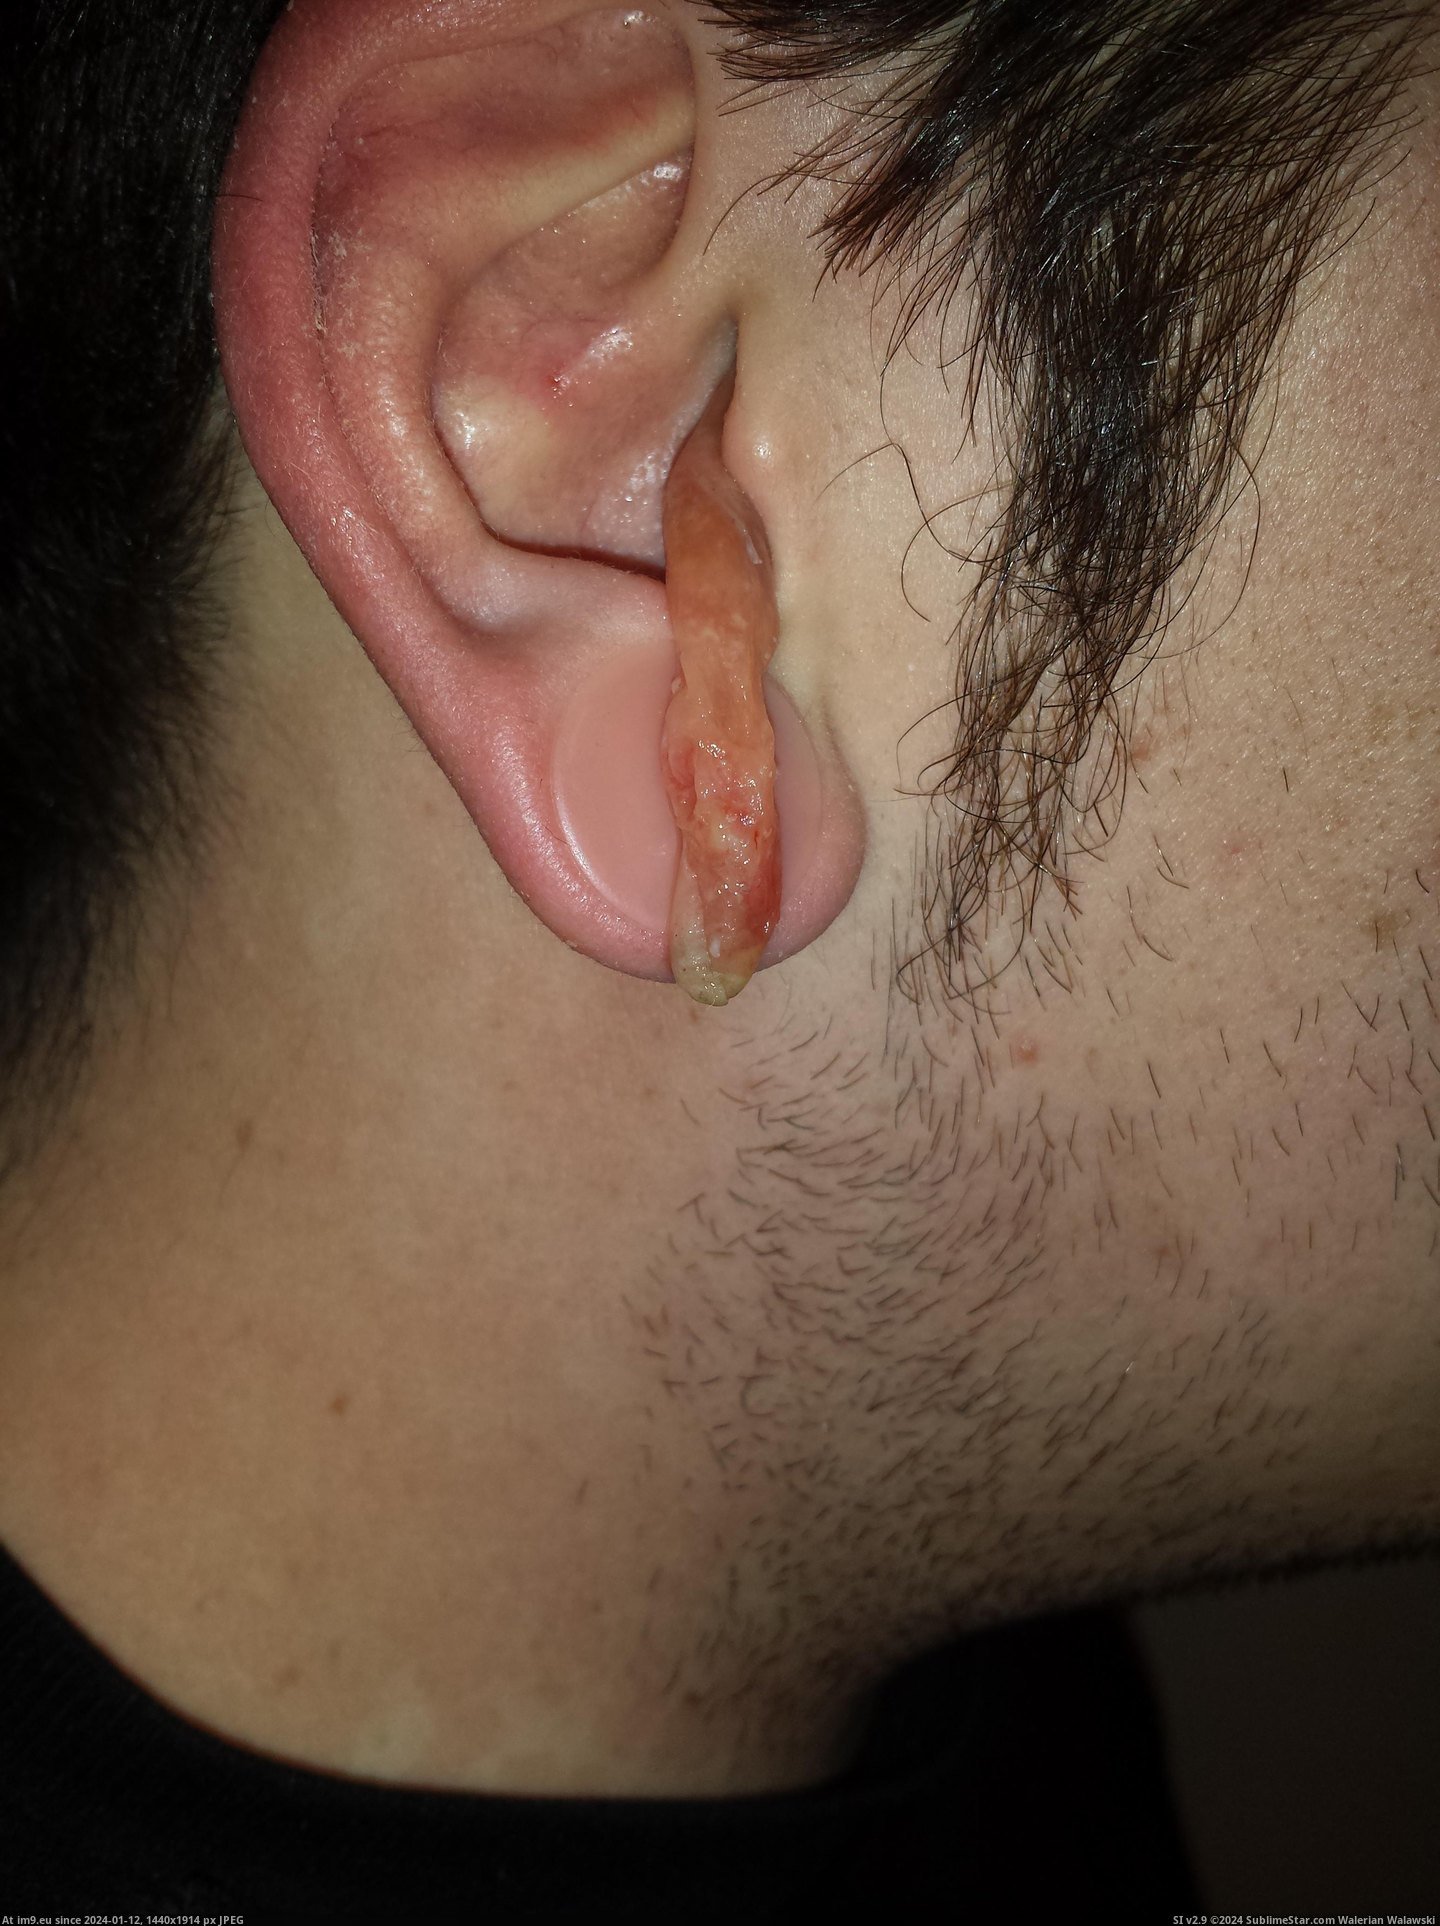 #Wtf #Ear #Infection #Crazy [Wtf] My crazy ear infection 8 Pic. (Image of album My r/WTF favs))